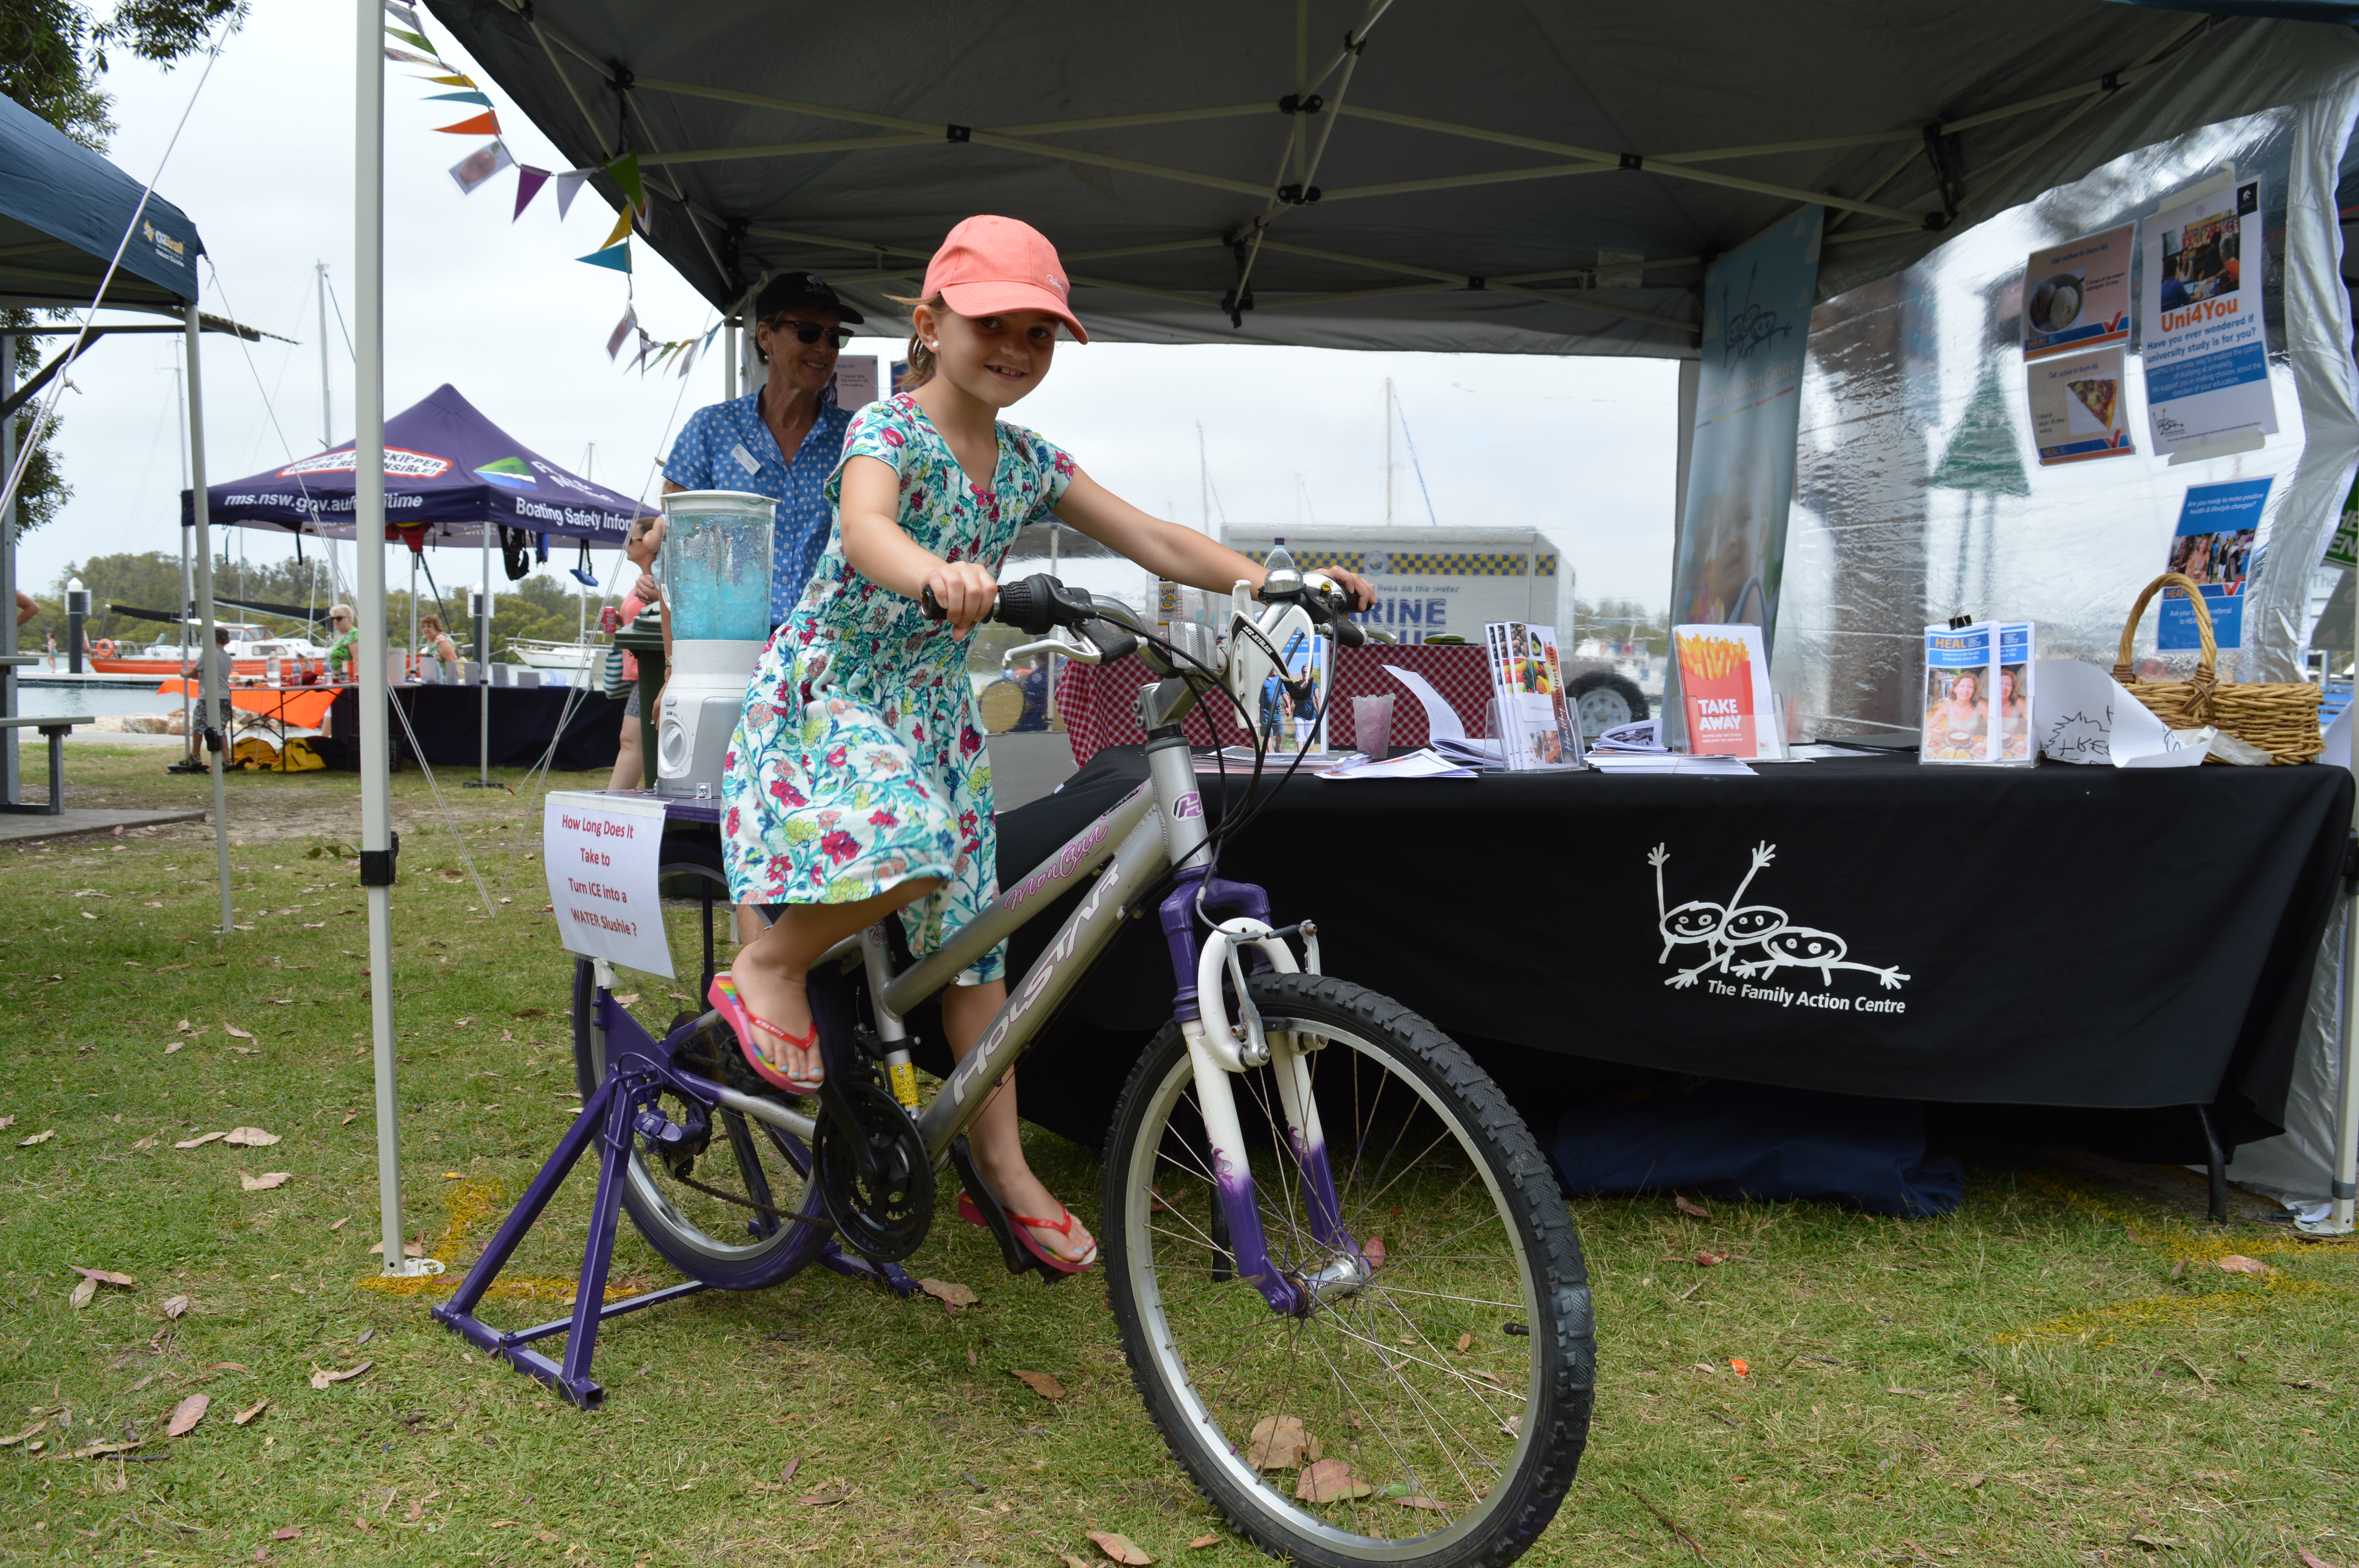 Olivia Hicks visiting from Merewether rides a bike to power a blender for the University of Newcastle’s Healthy Eating and Active Lifestyle (HEAL) program.